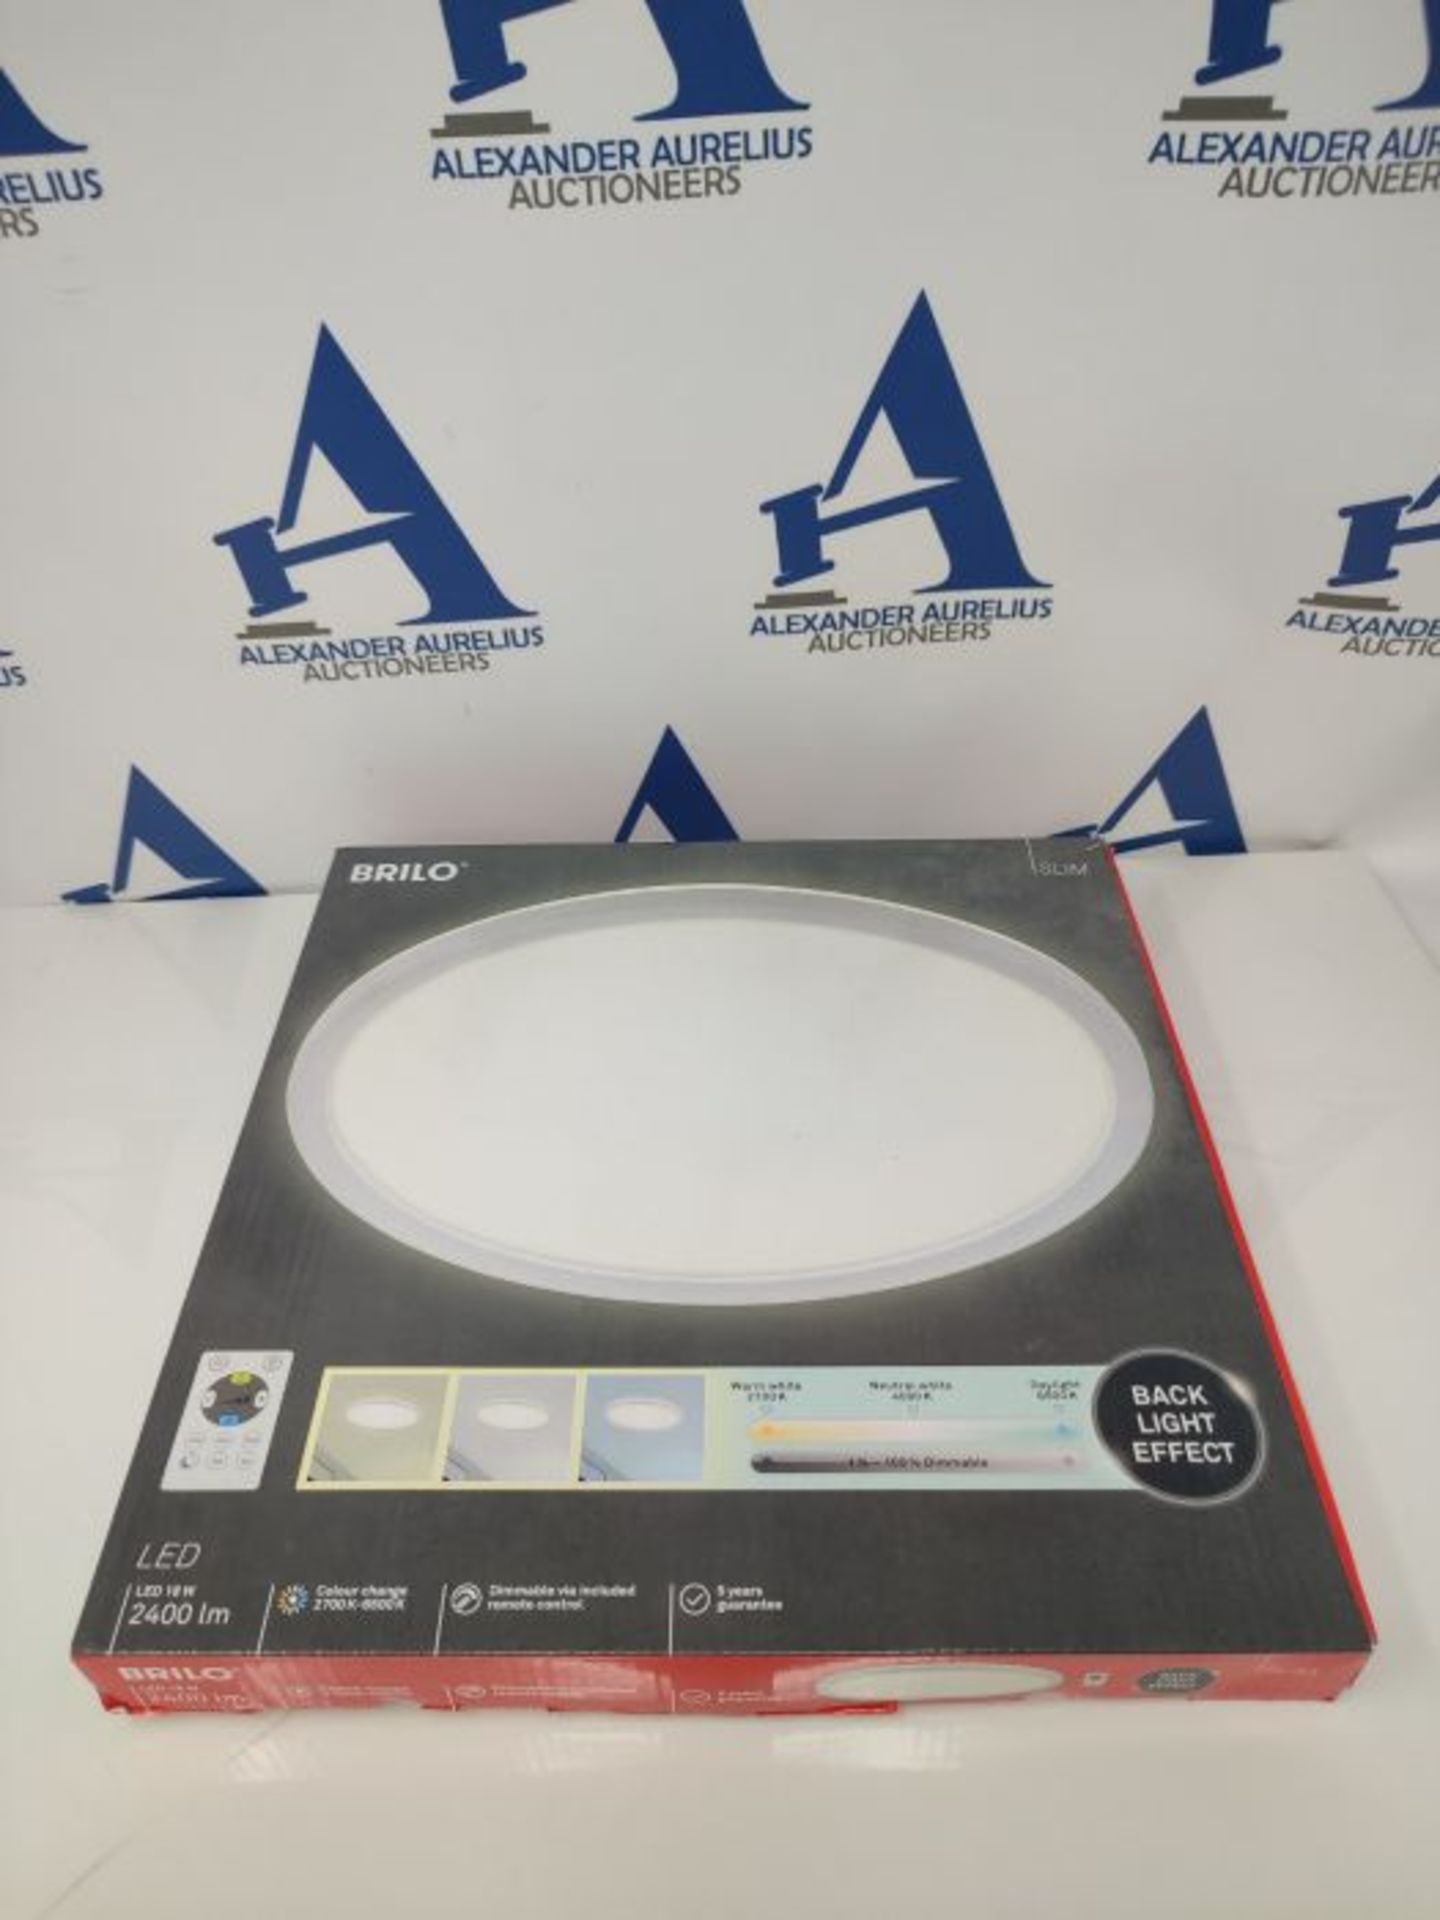 Briloner Leuchten 7079-016 LED Panel Ceiling Light Dimmable with Backlight with Remote - Image 2 of 6